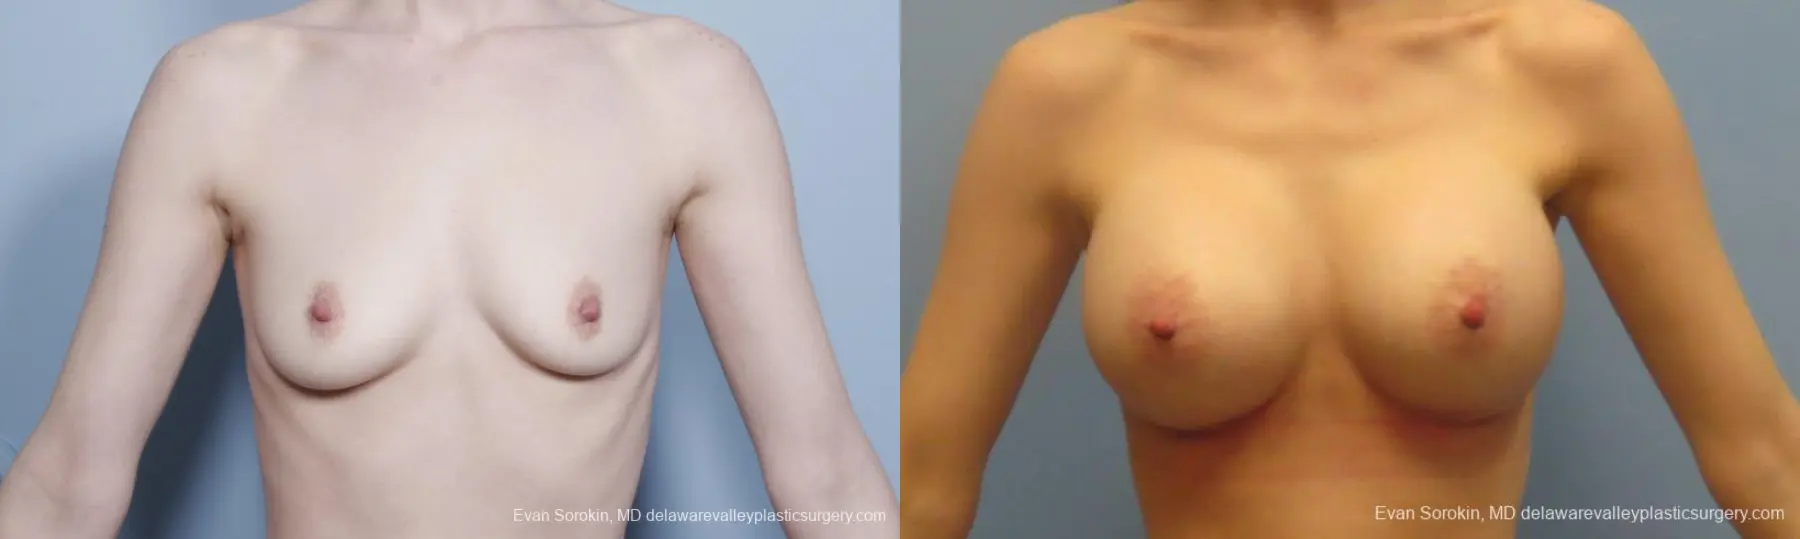 Philadelphia Breast Augmentation 8781 - Before and After 1